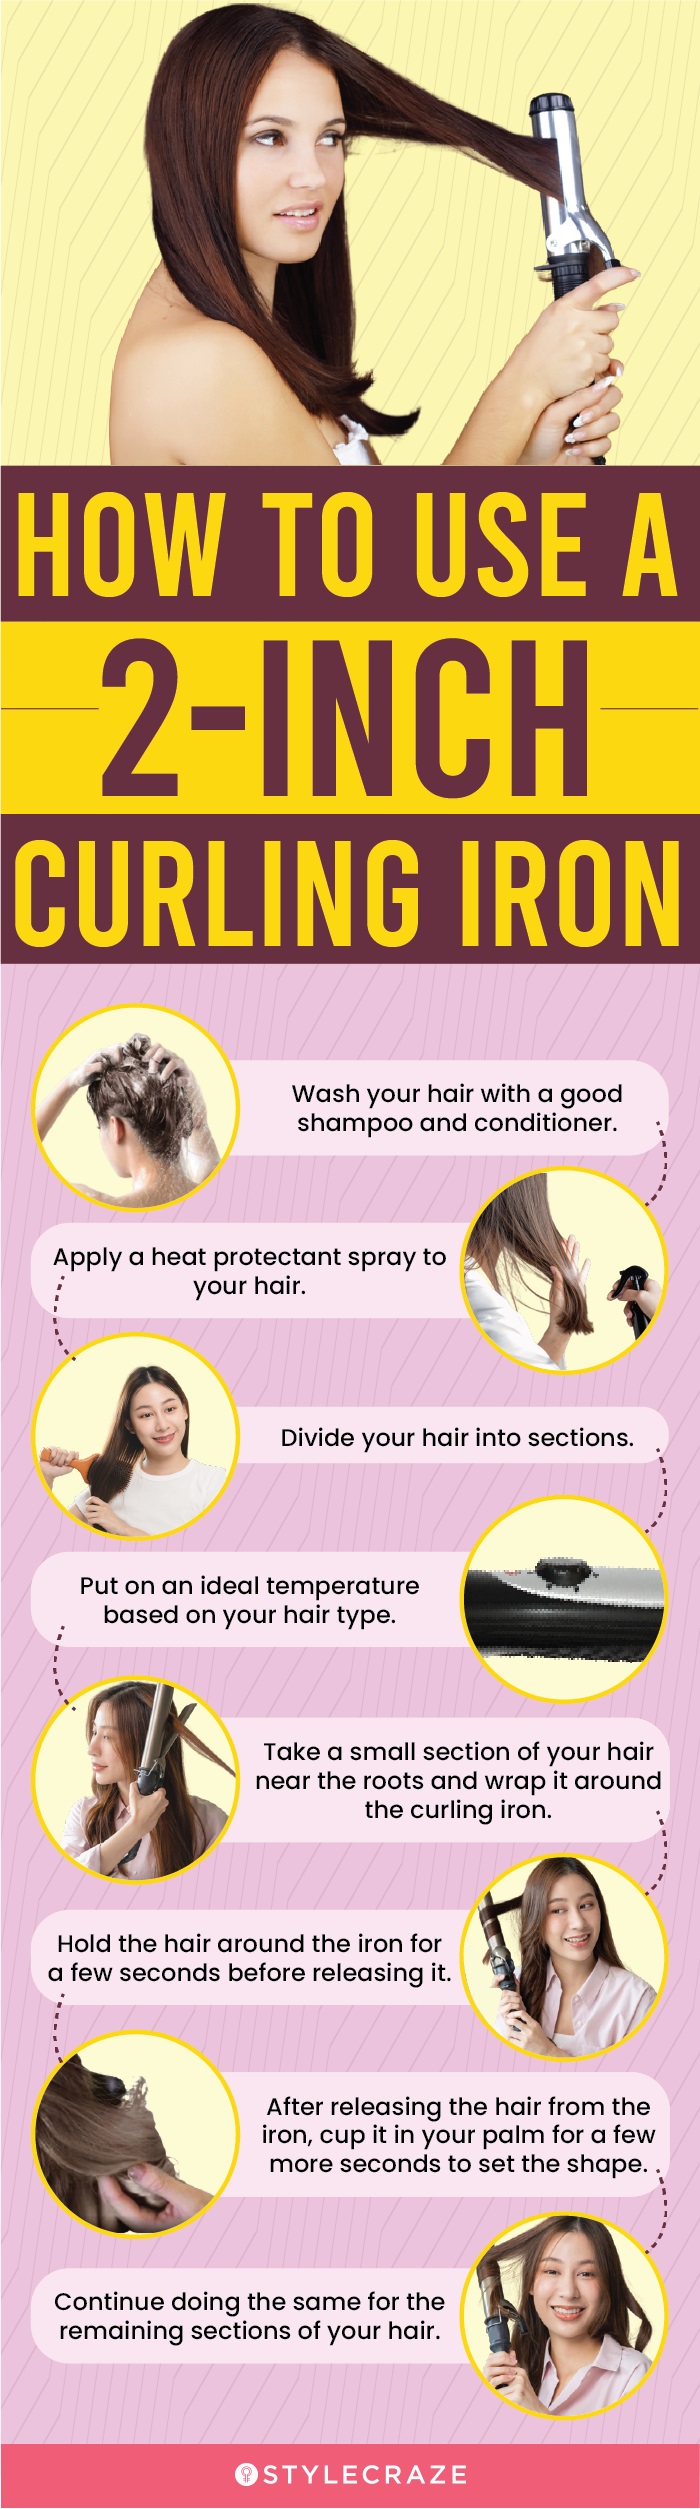  How To Use A 2-Inch Curling Iron (infographic) 